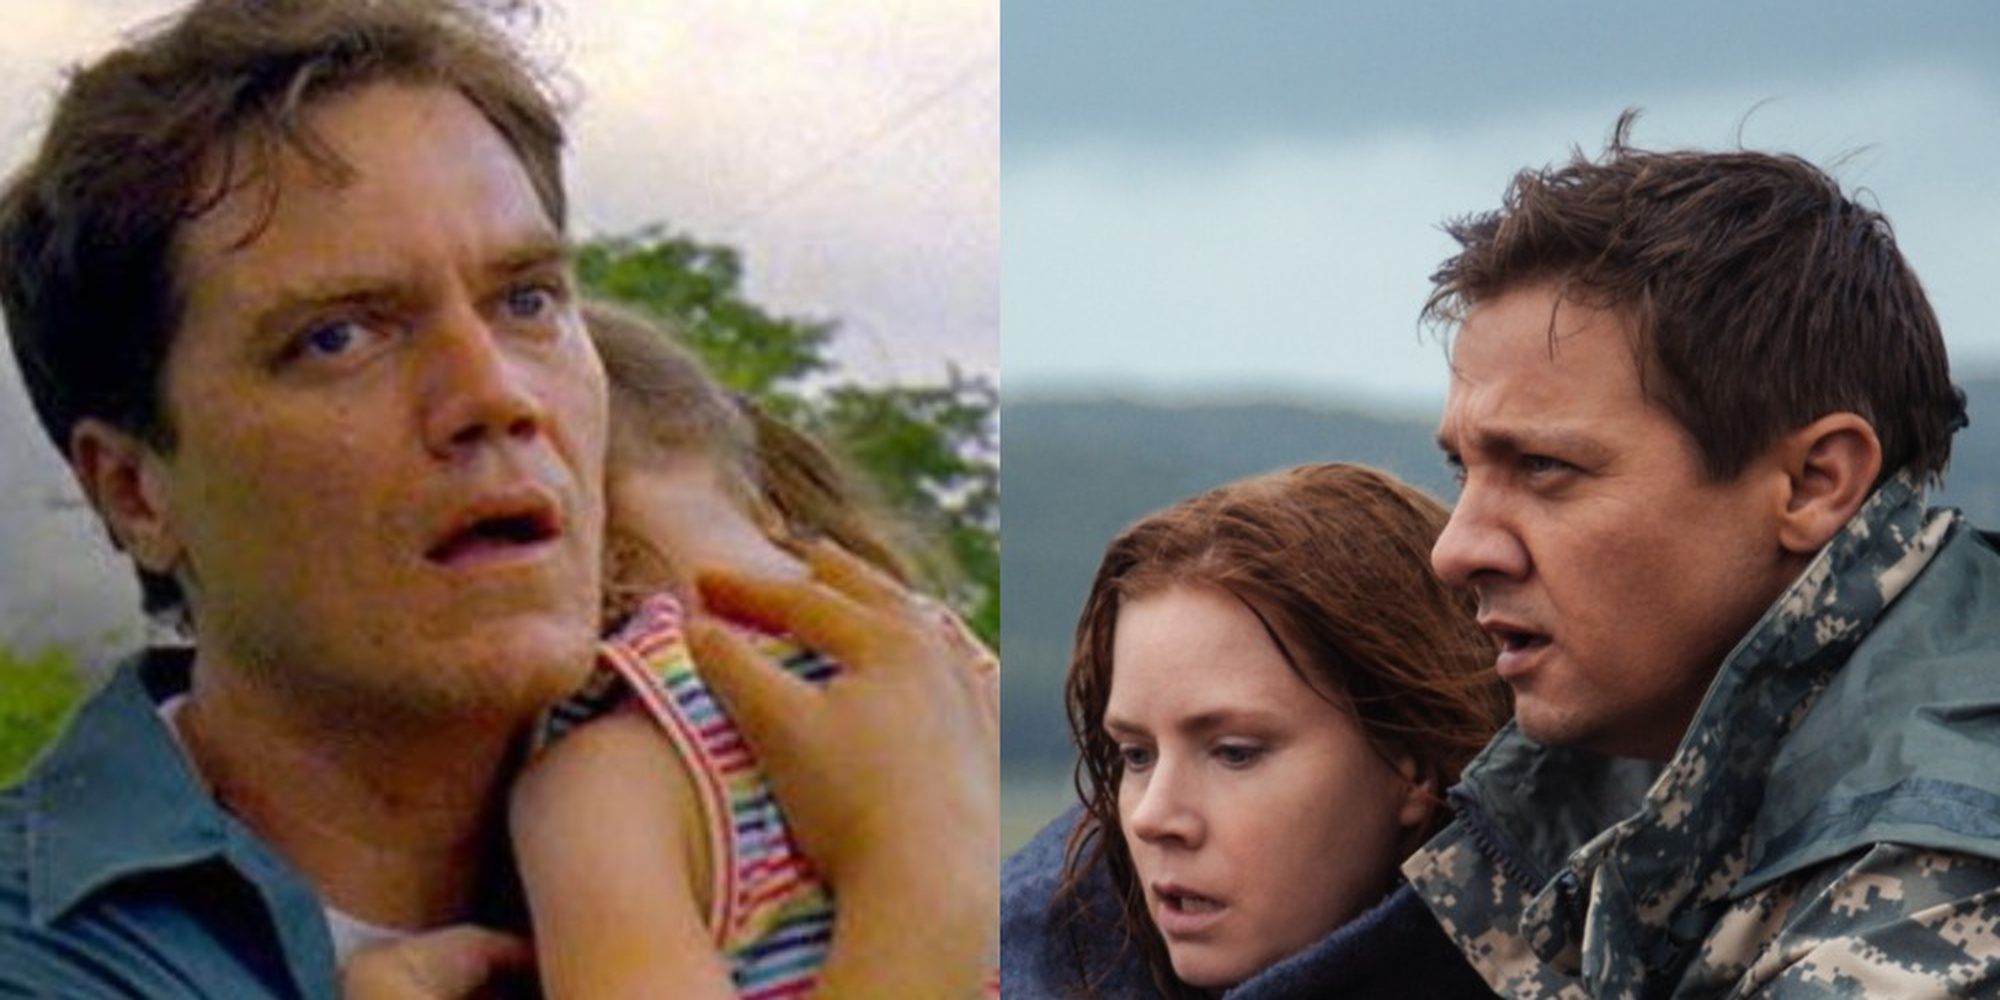 Featured image with Michael Shannon, Amy Adams and Jeremy Renner